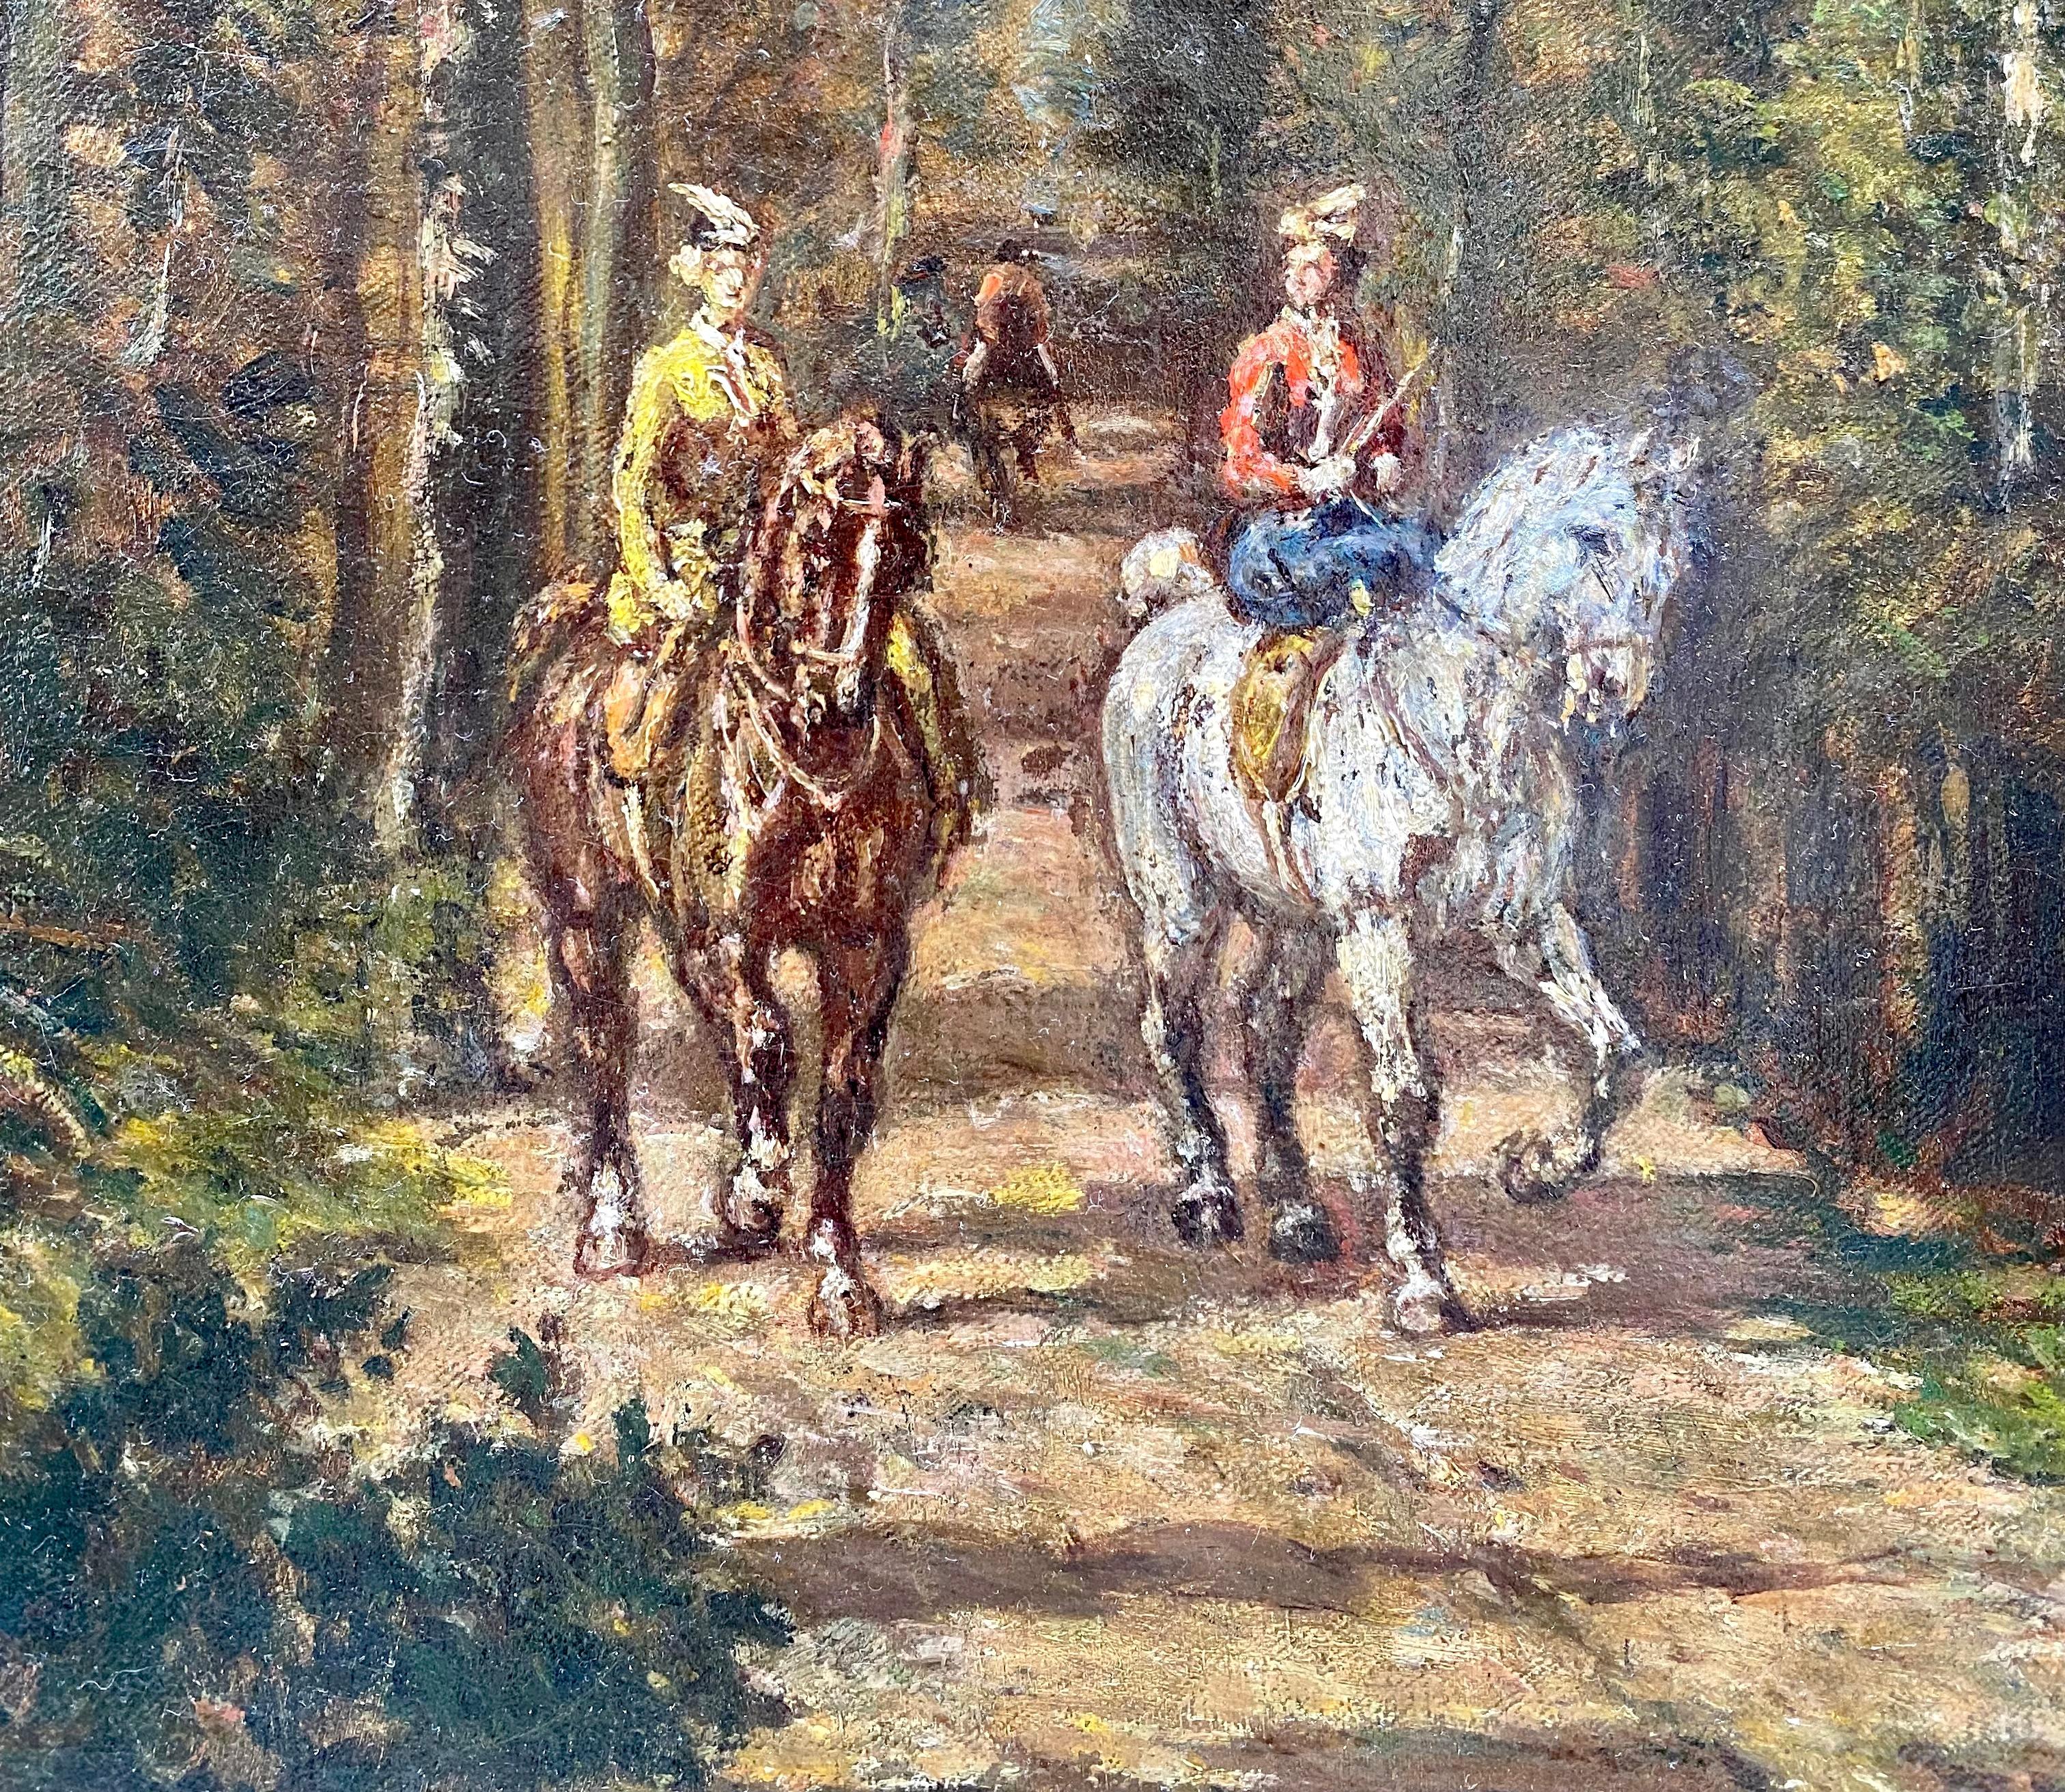 Riders in the woods; excursion on horse back French equestrian painting  - Painting by Donat Pellegrin